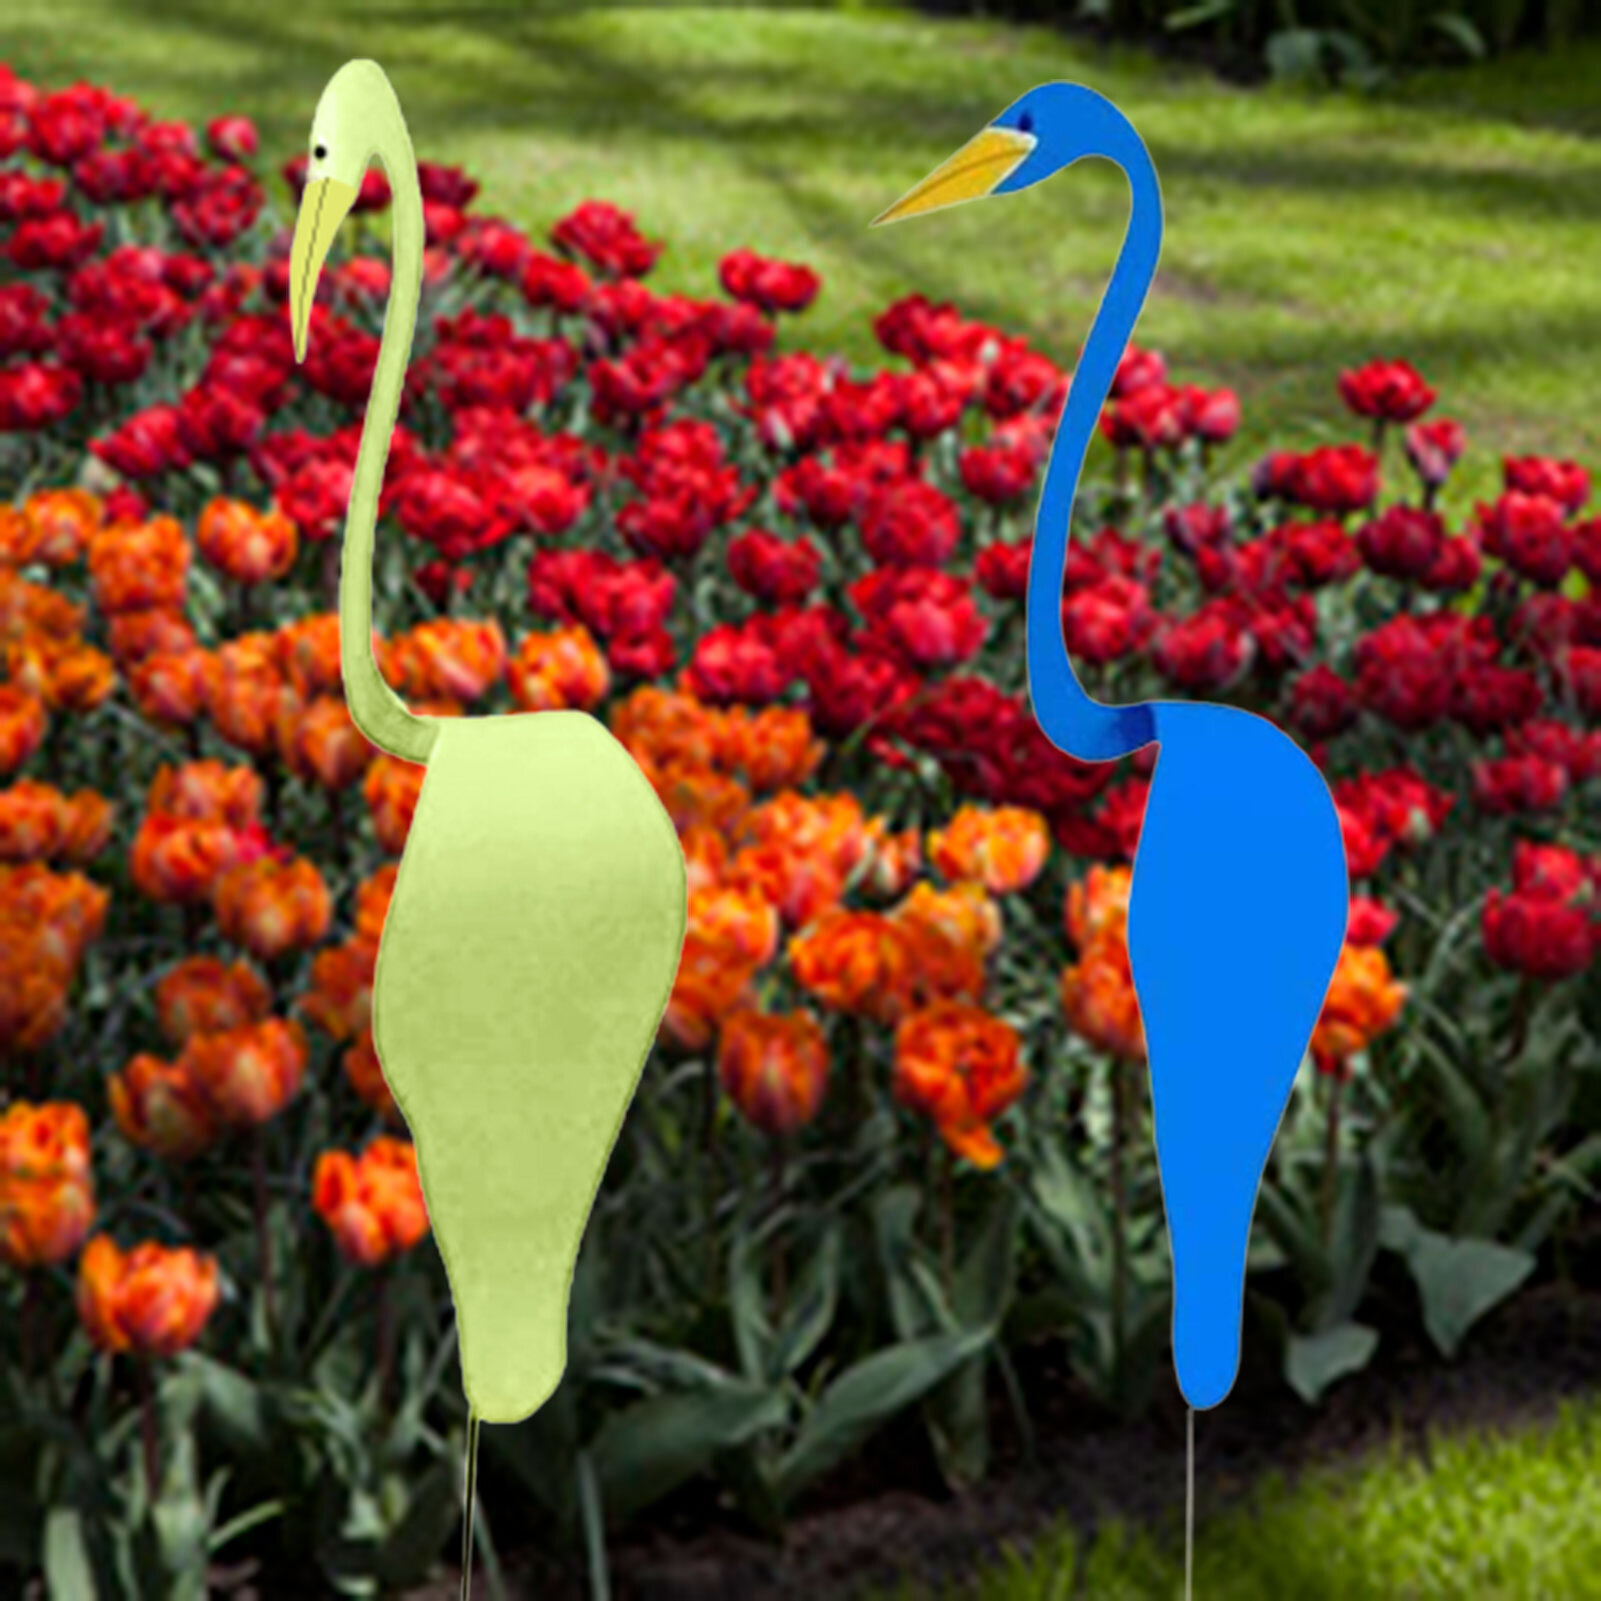 Details about   Swirl Bird-a Whimsical and Dynamic Bird Swirling Flamingo Wind Spinner Chime 